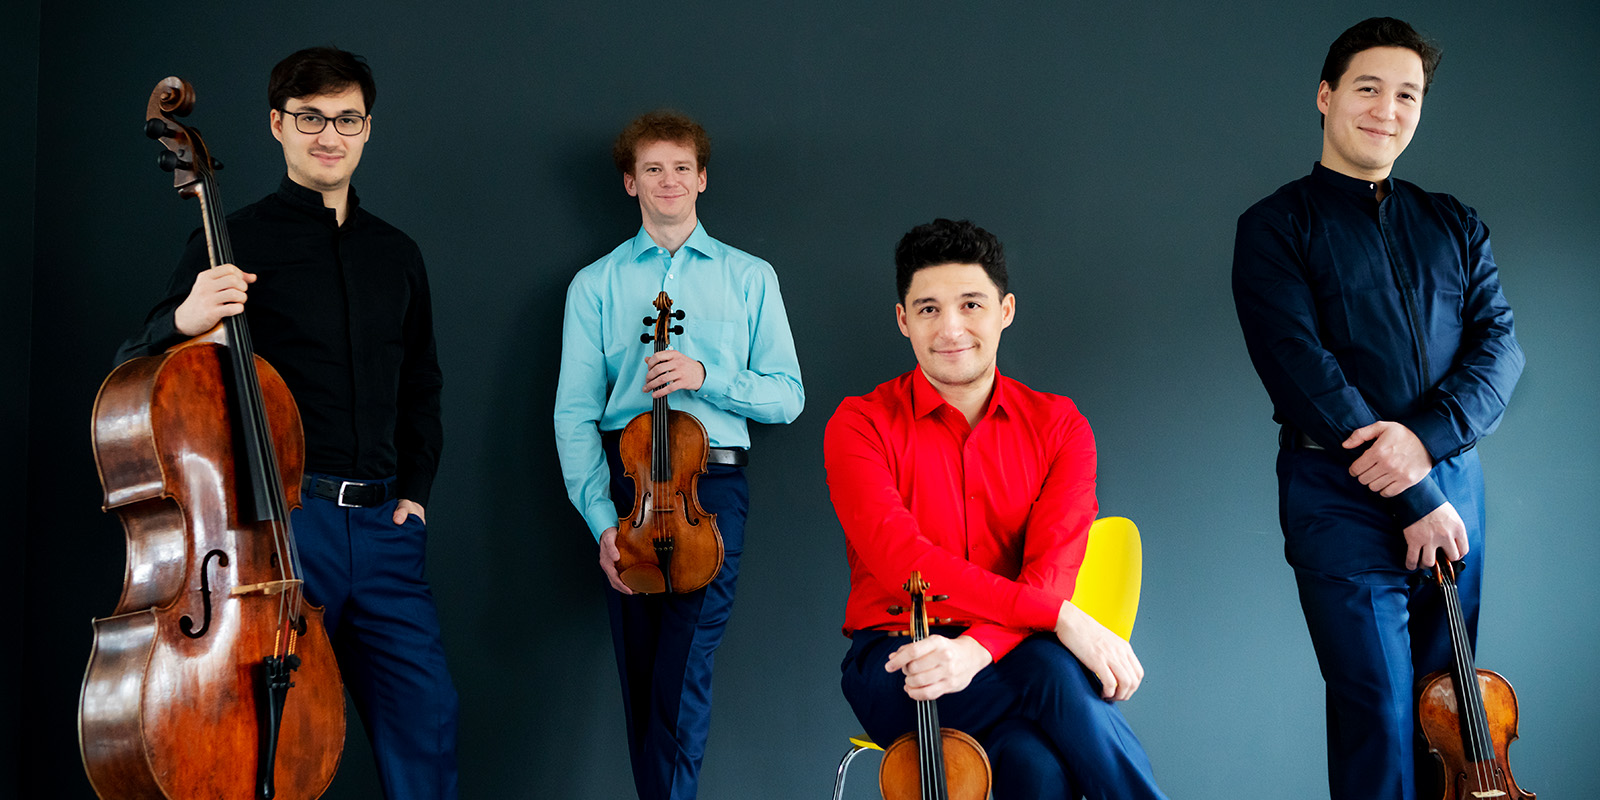 Four men wear colorful shirts and hold violins, a viola, and cella